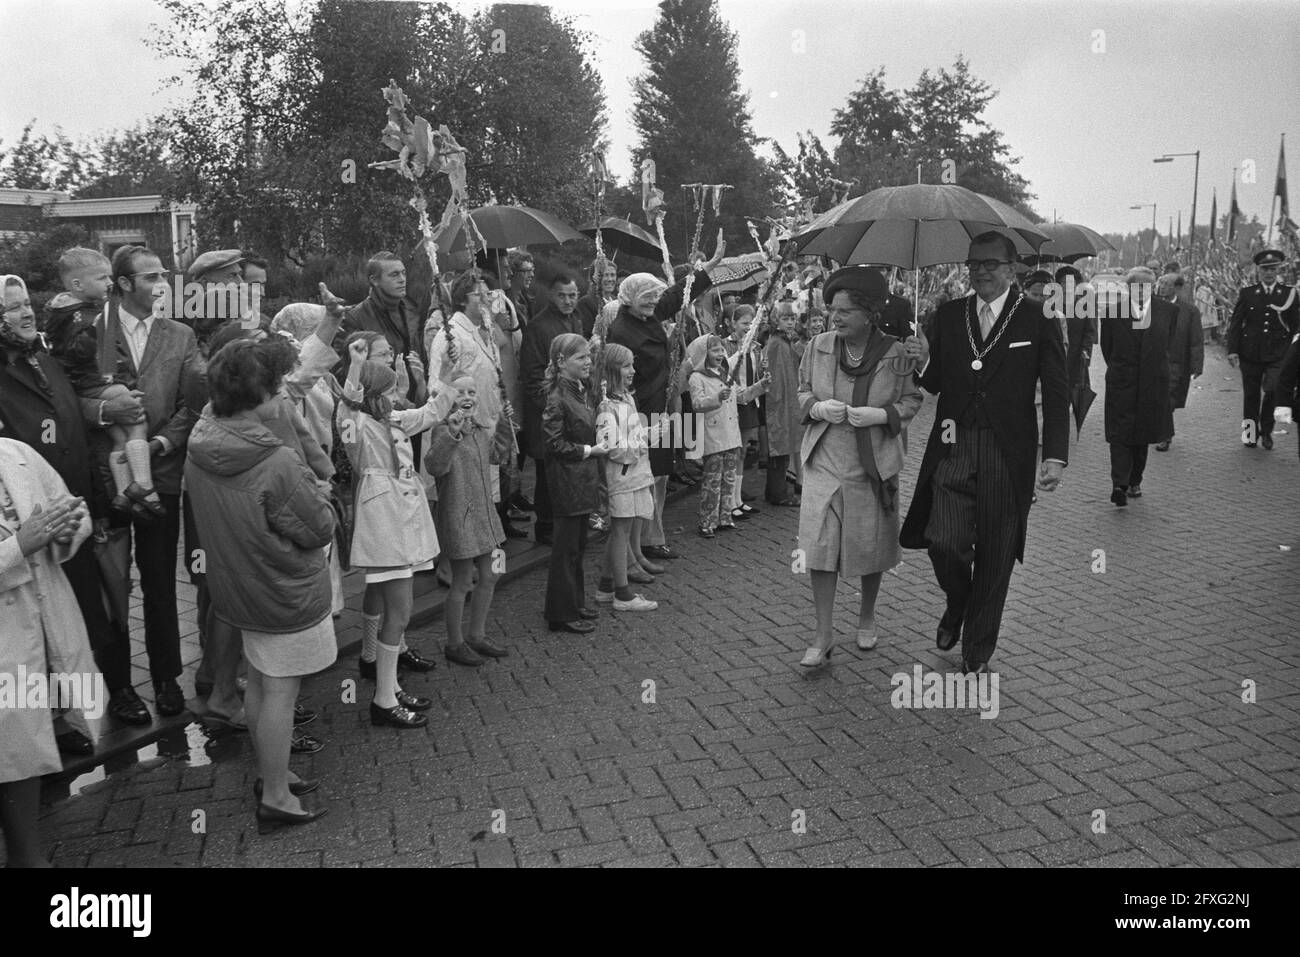 Queen Juliana visits municipalities Rhoon, Poortugaal and Maassluis ( South Holland ), September 24, 1971, mayors, children, queens, umbrellas, The Netherlands, 20th century press agency photo, news to remember, documentary, historic photography 1945-1990, visual stories, human history of the Twentieth Century, capturing moments in time Stock Photo